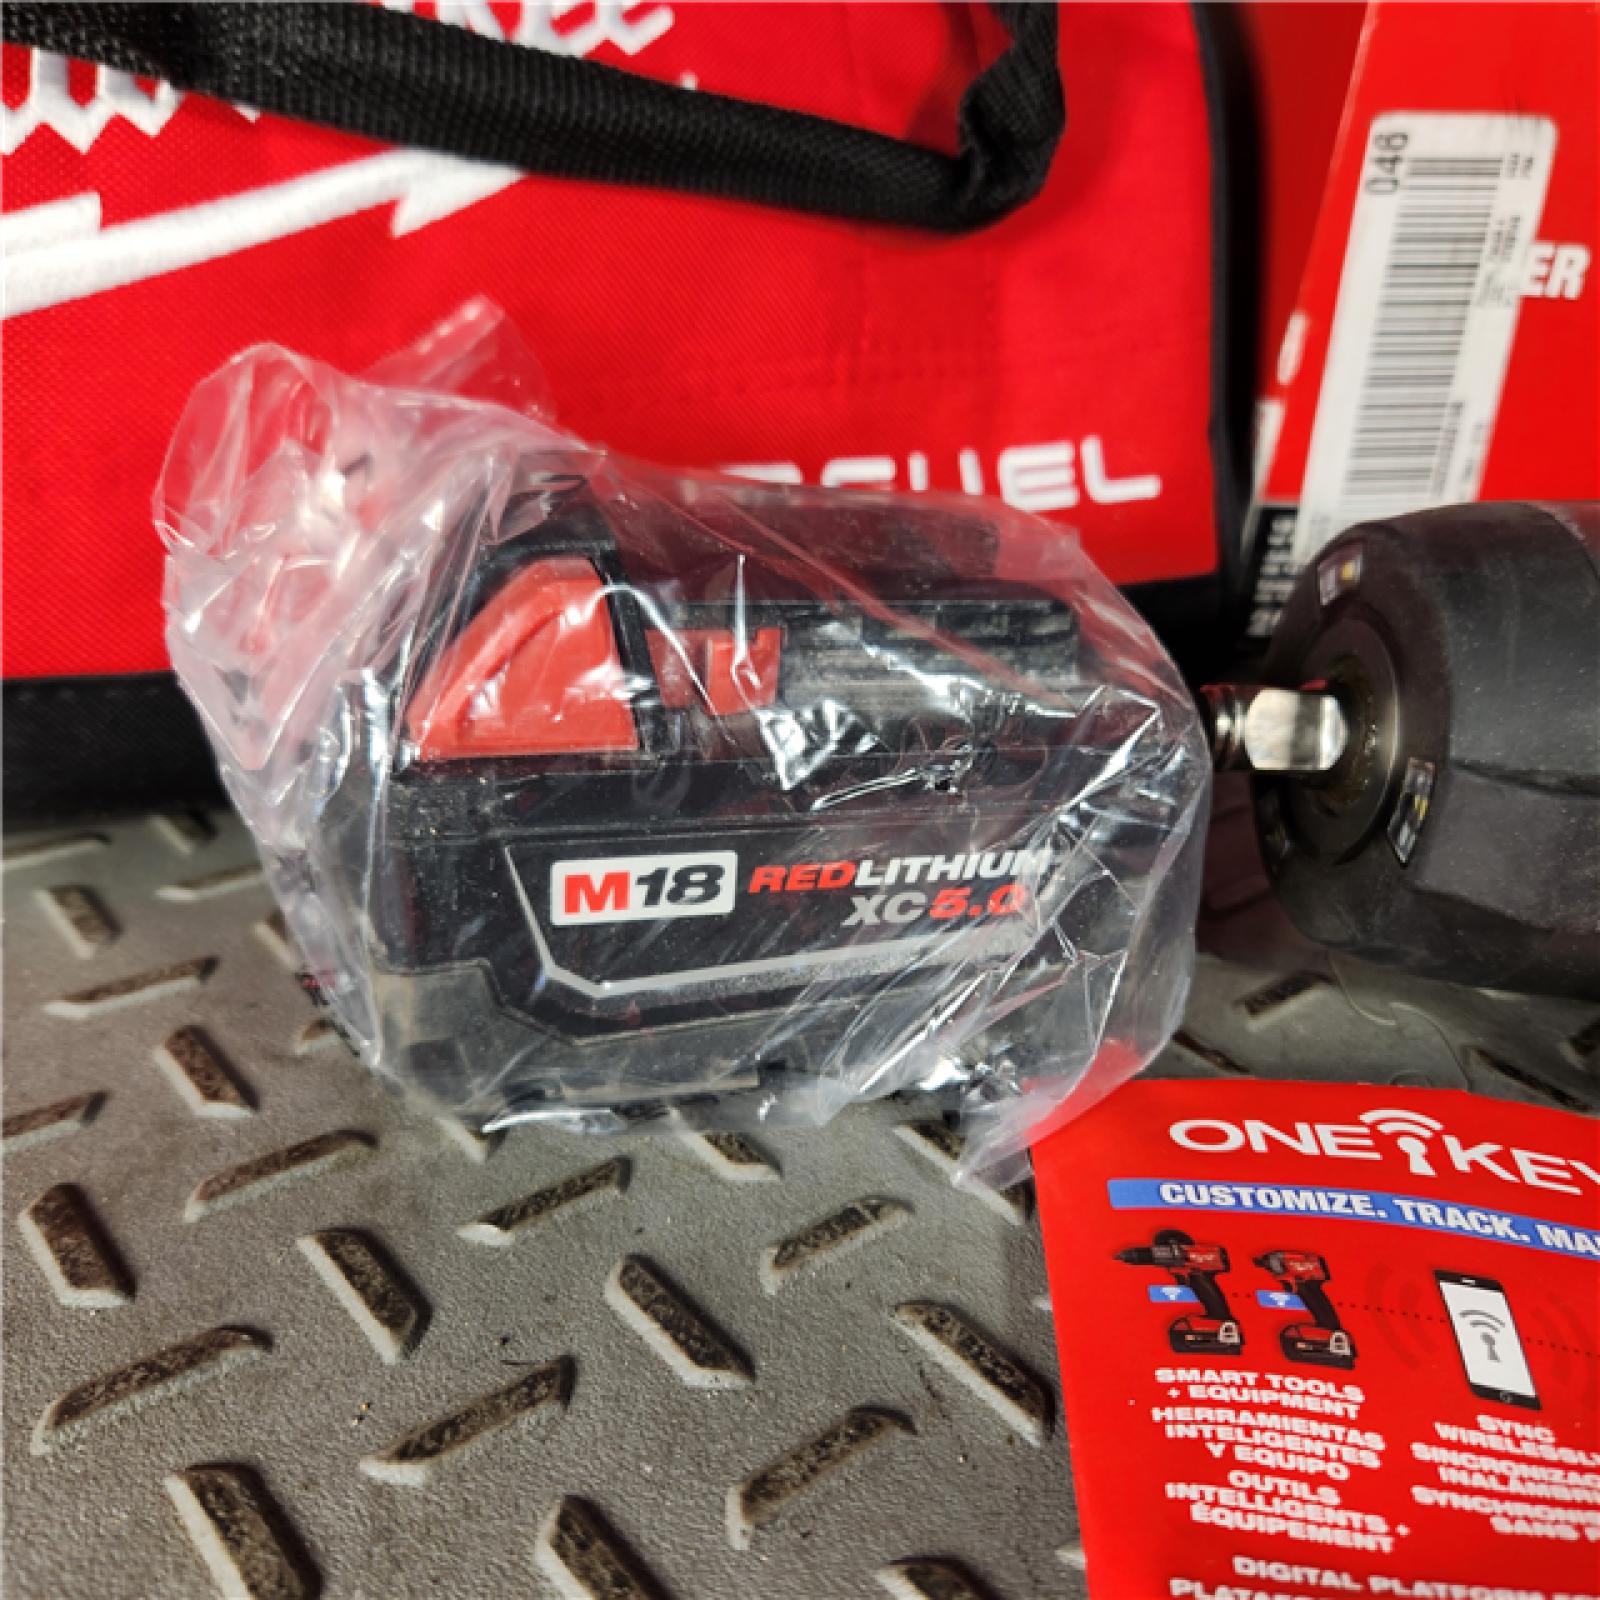 Houston Location - As-Is Milwaukee 2967-21B 18V M18 FUEL 1/2 Brushless Cordless High Torque Wrench W/ Friction Ring Kit 5.0 Ah - Appears IN LIKE NEW Condition